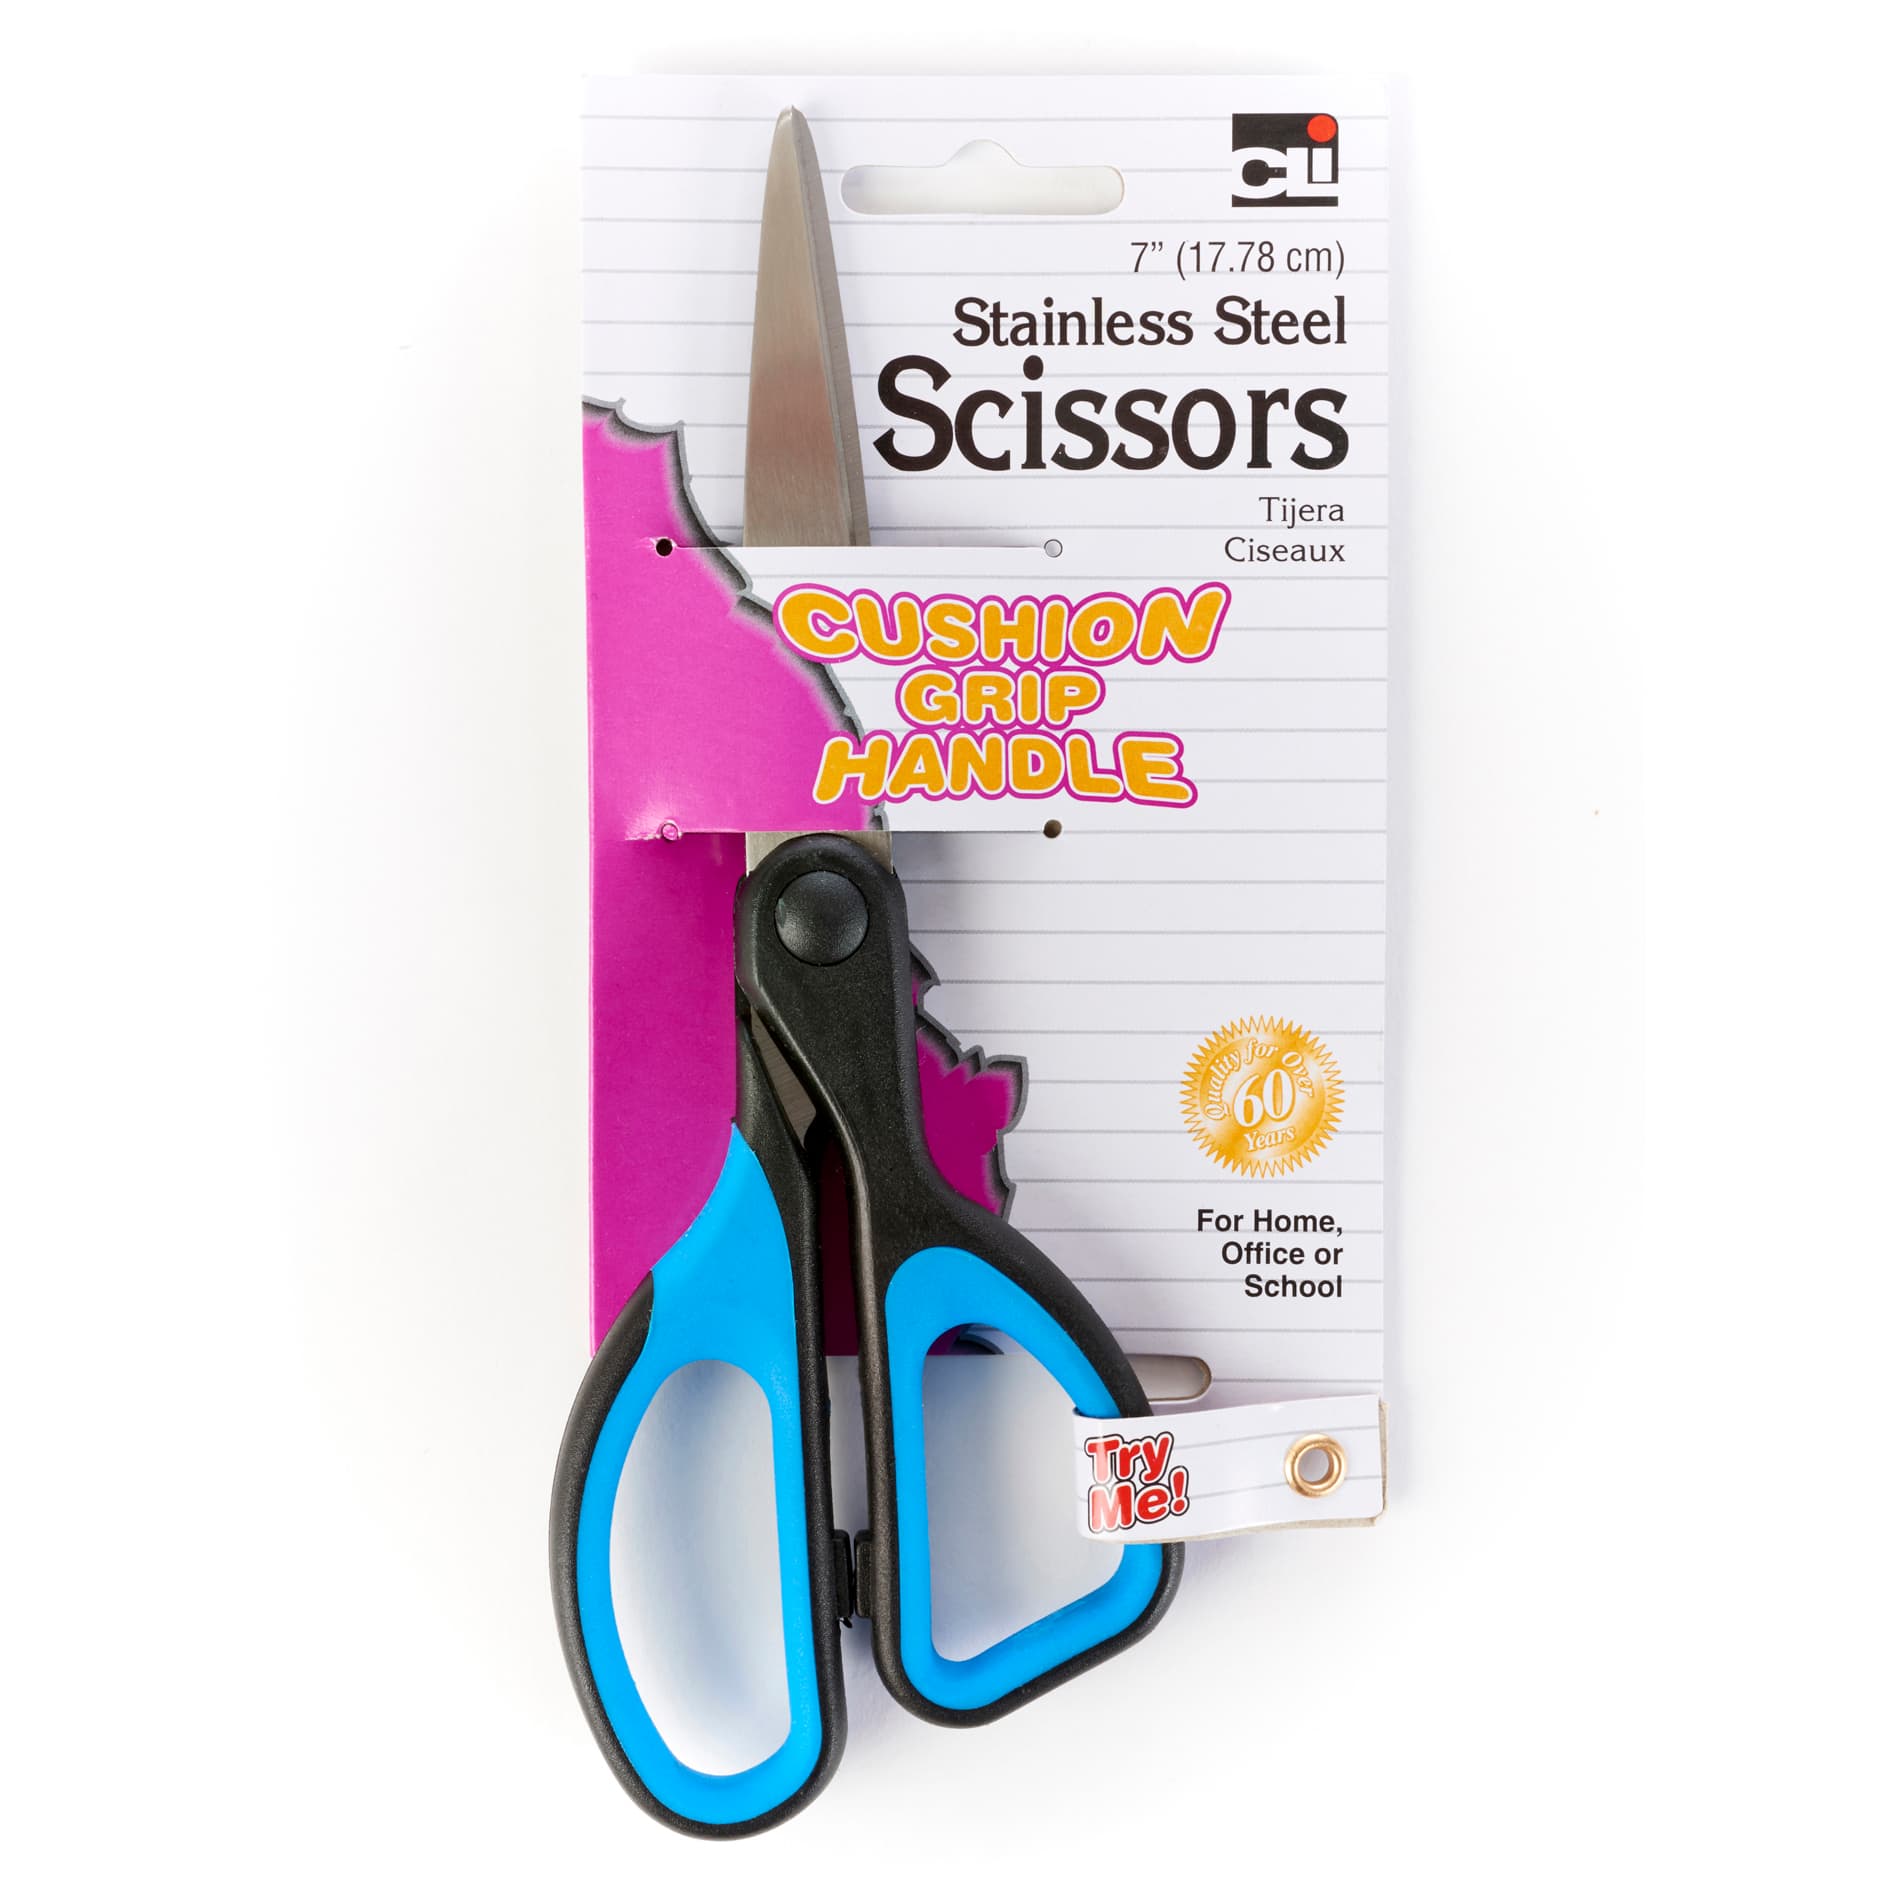 7 Straight Stainless Steel Cushion Grip Scissors, Pack of 12